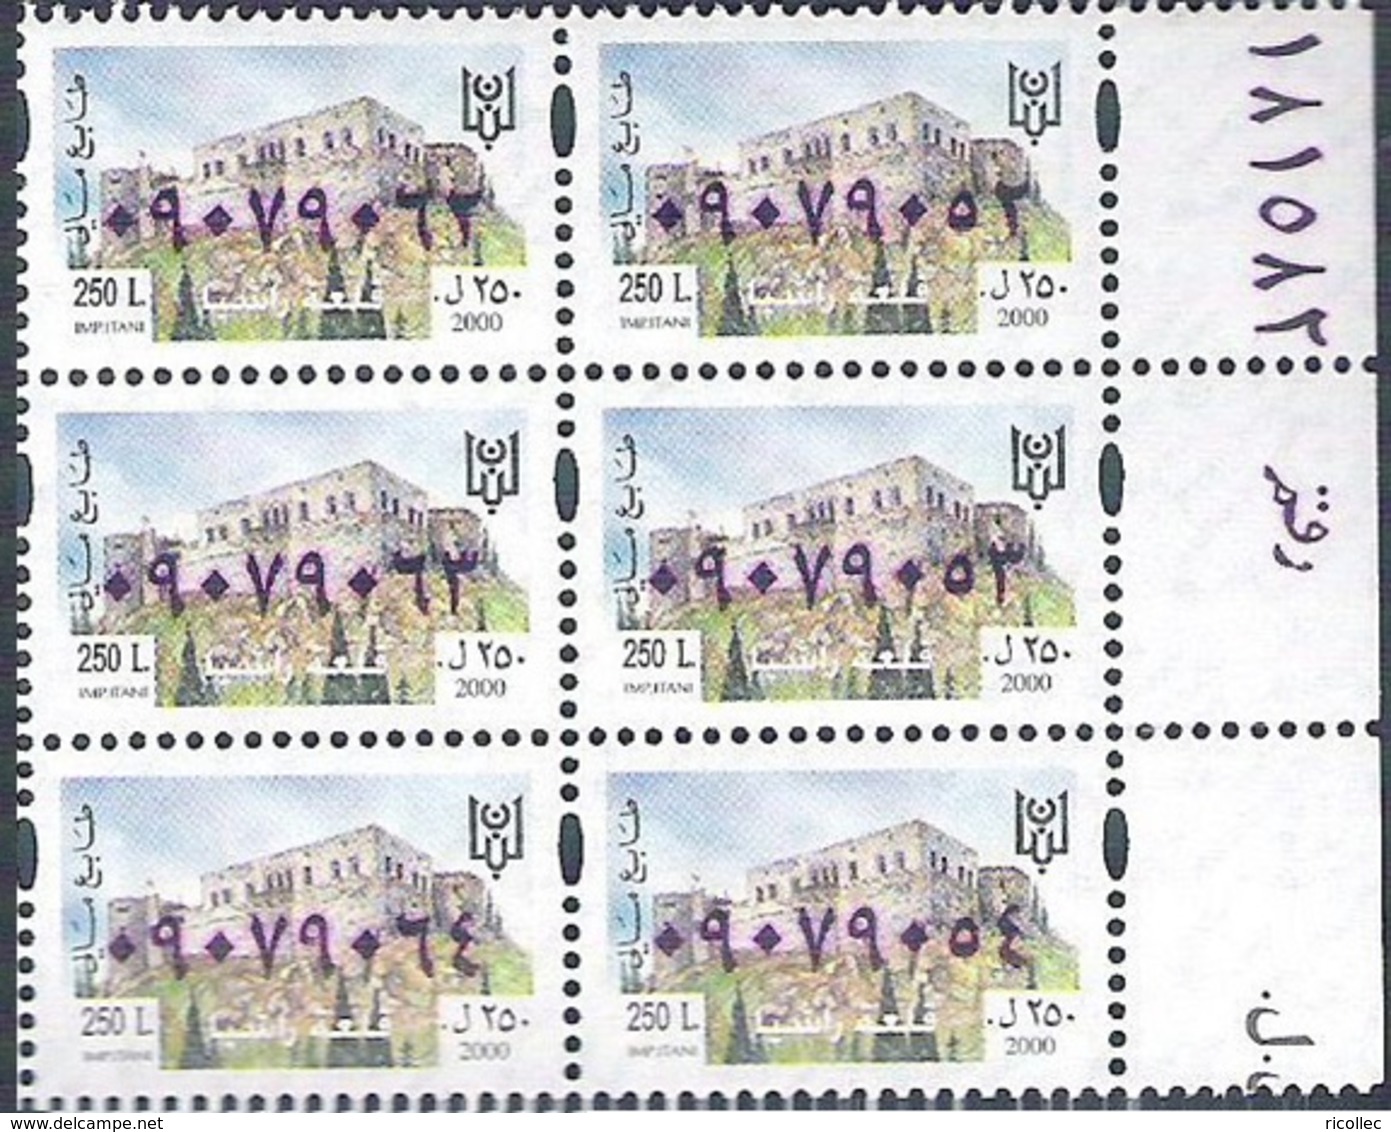 MNH Block Of 6 Fiscal Revenue Stamps With Sheet Number Rachaya 250 Livres 2000 LEBANON LIBAN - Liban